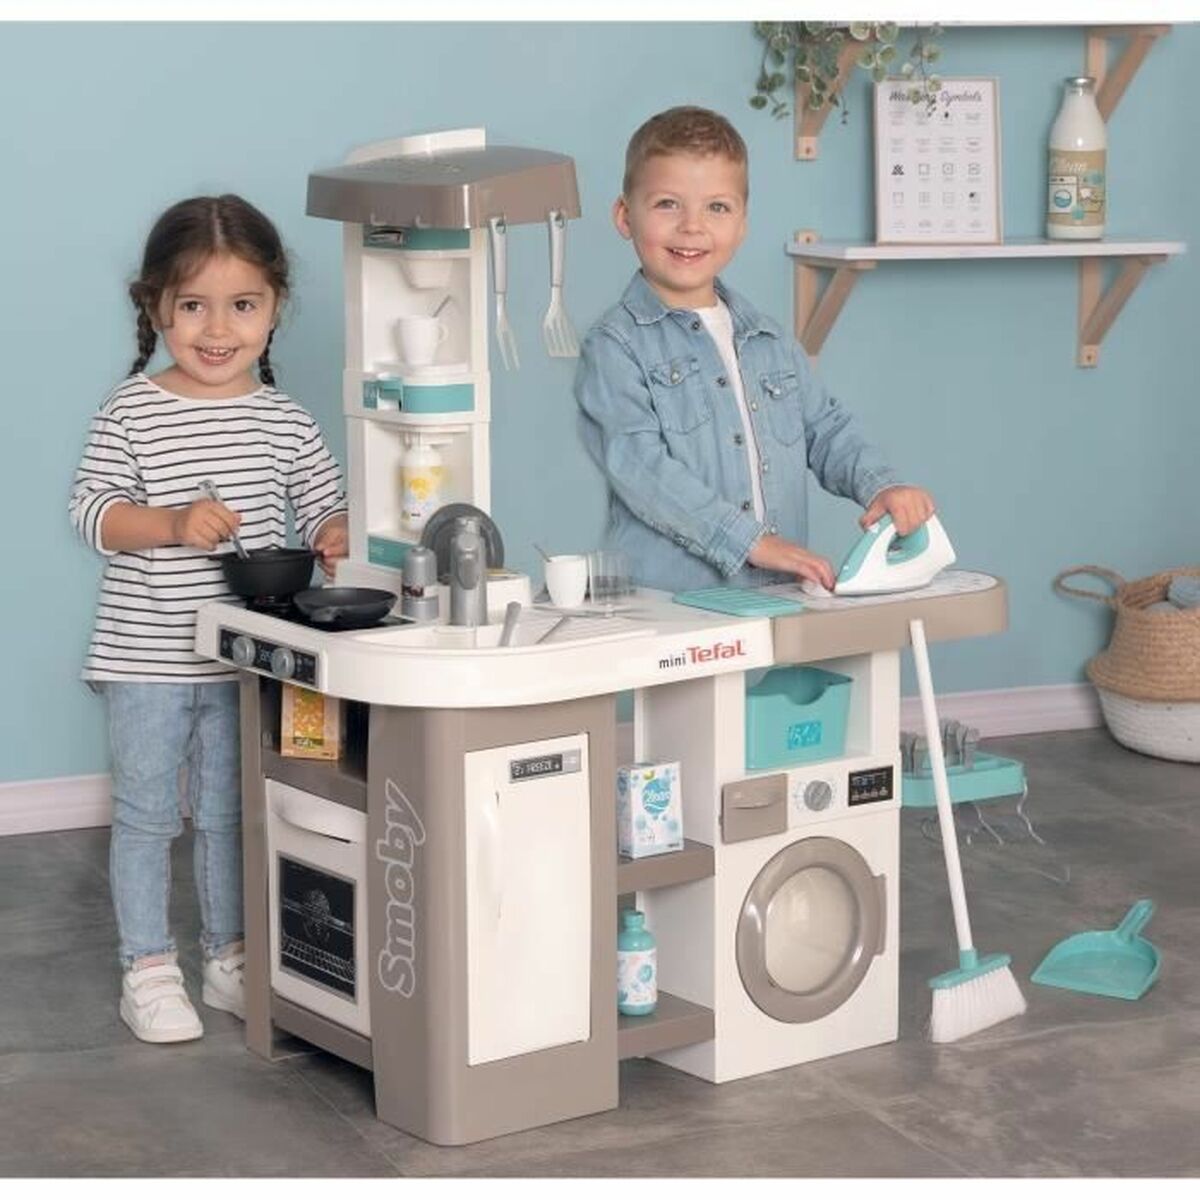 Toy kitchen Smoby Tefal